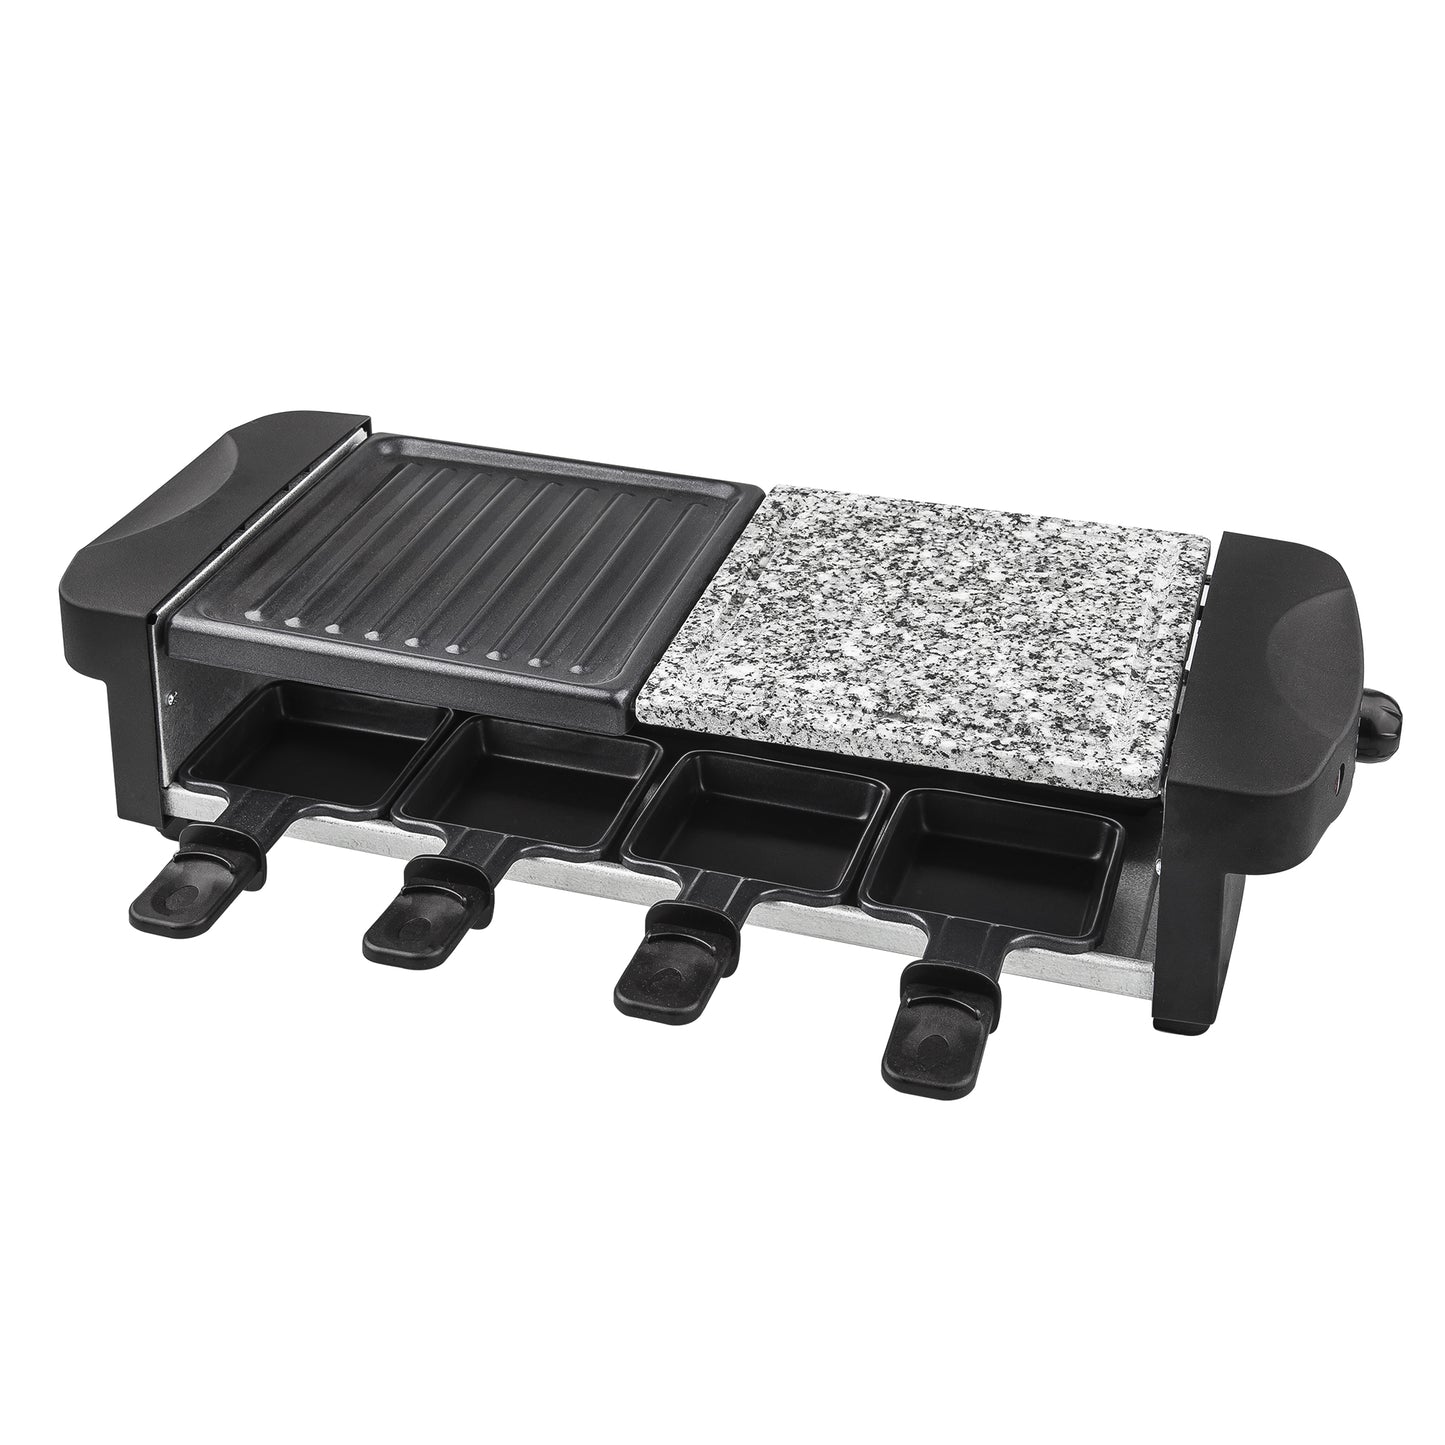 RACLETTE GRILL / STONE 1200W 